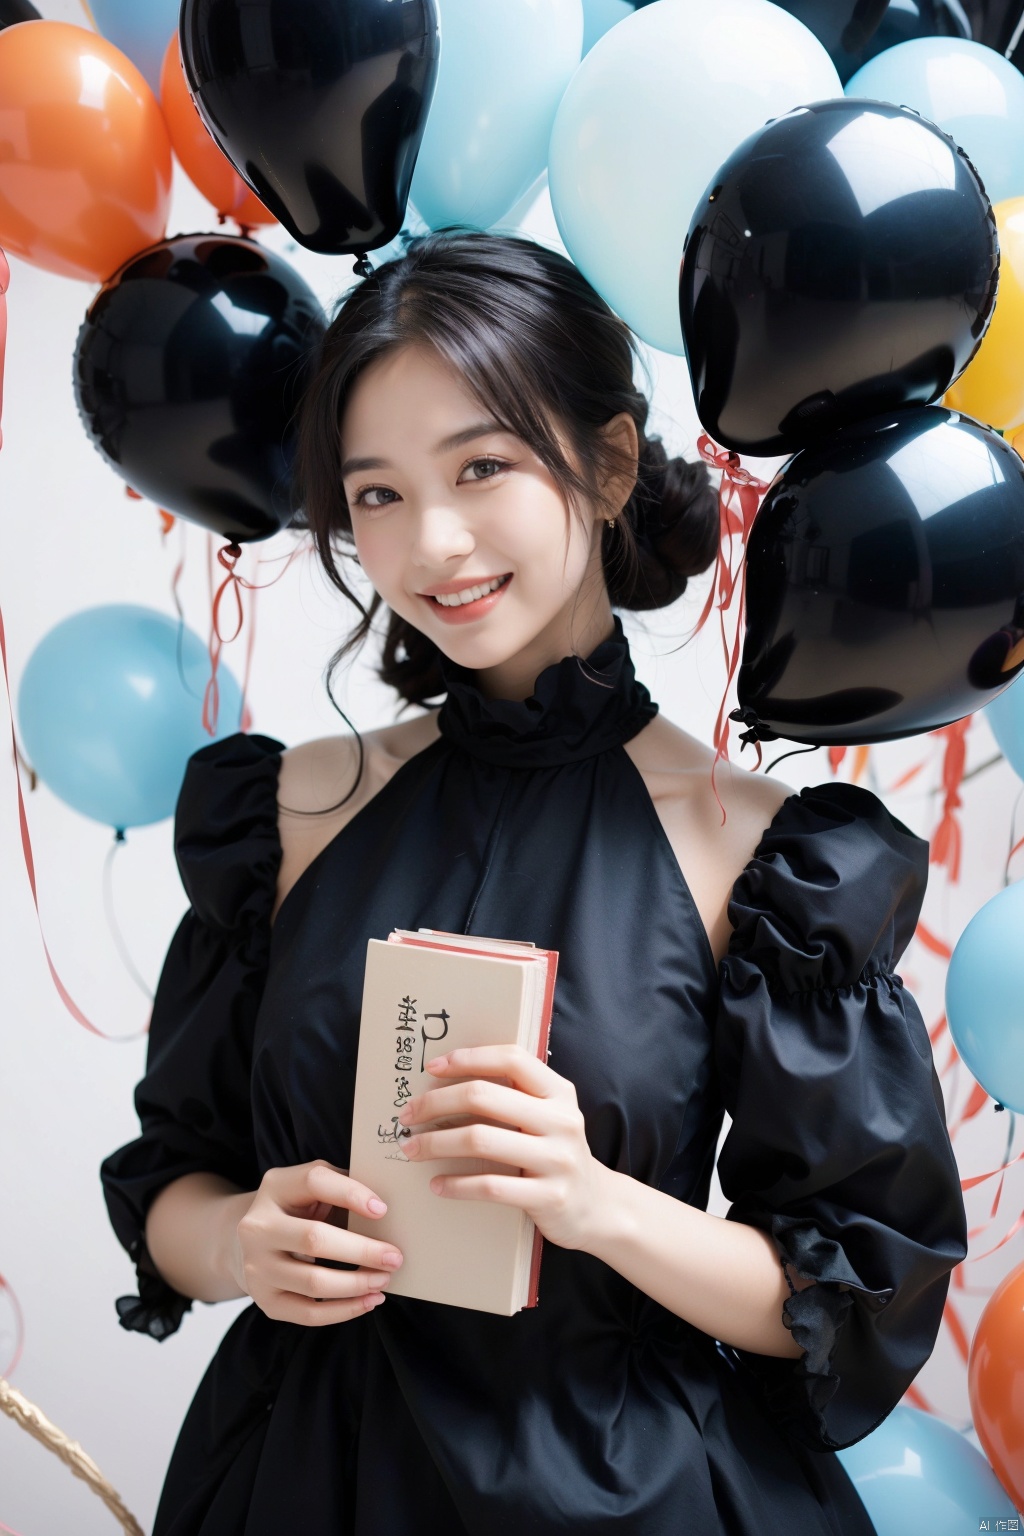 Portrait of the upper body. (1 girl). In a black dress, holding a book, surrounded by five colored black balloons, smiling happily, joyful, celebrating, innocent, young, with a floral background, vibrant colors, high-quality images, full HD, clear focus, dreamy background, and gentle colors.

